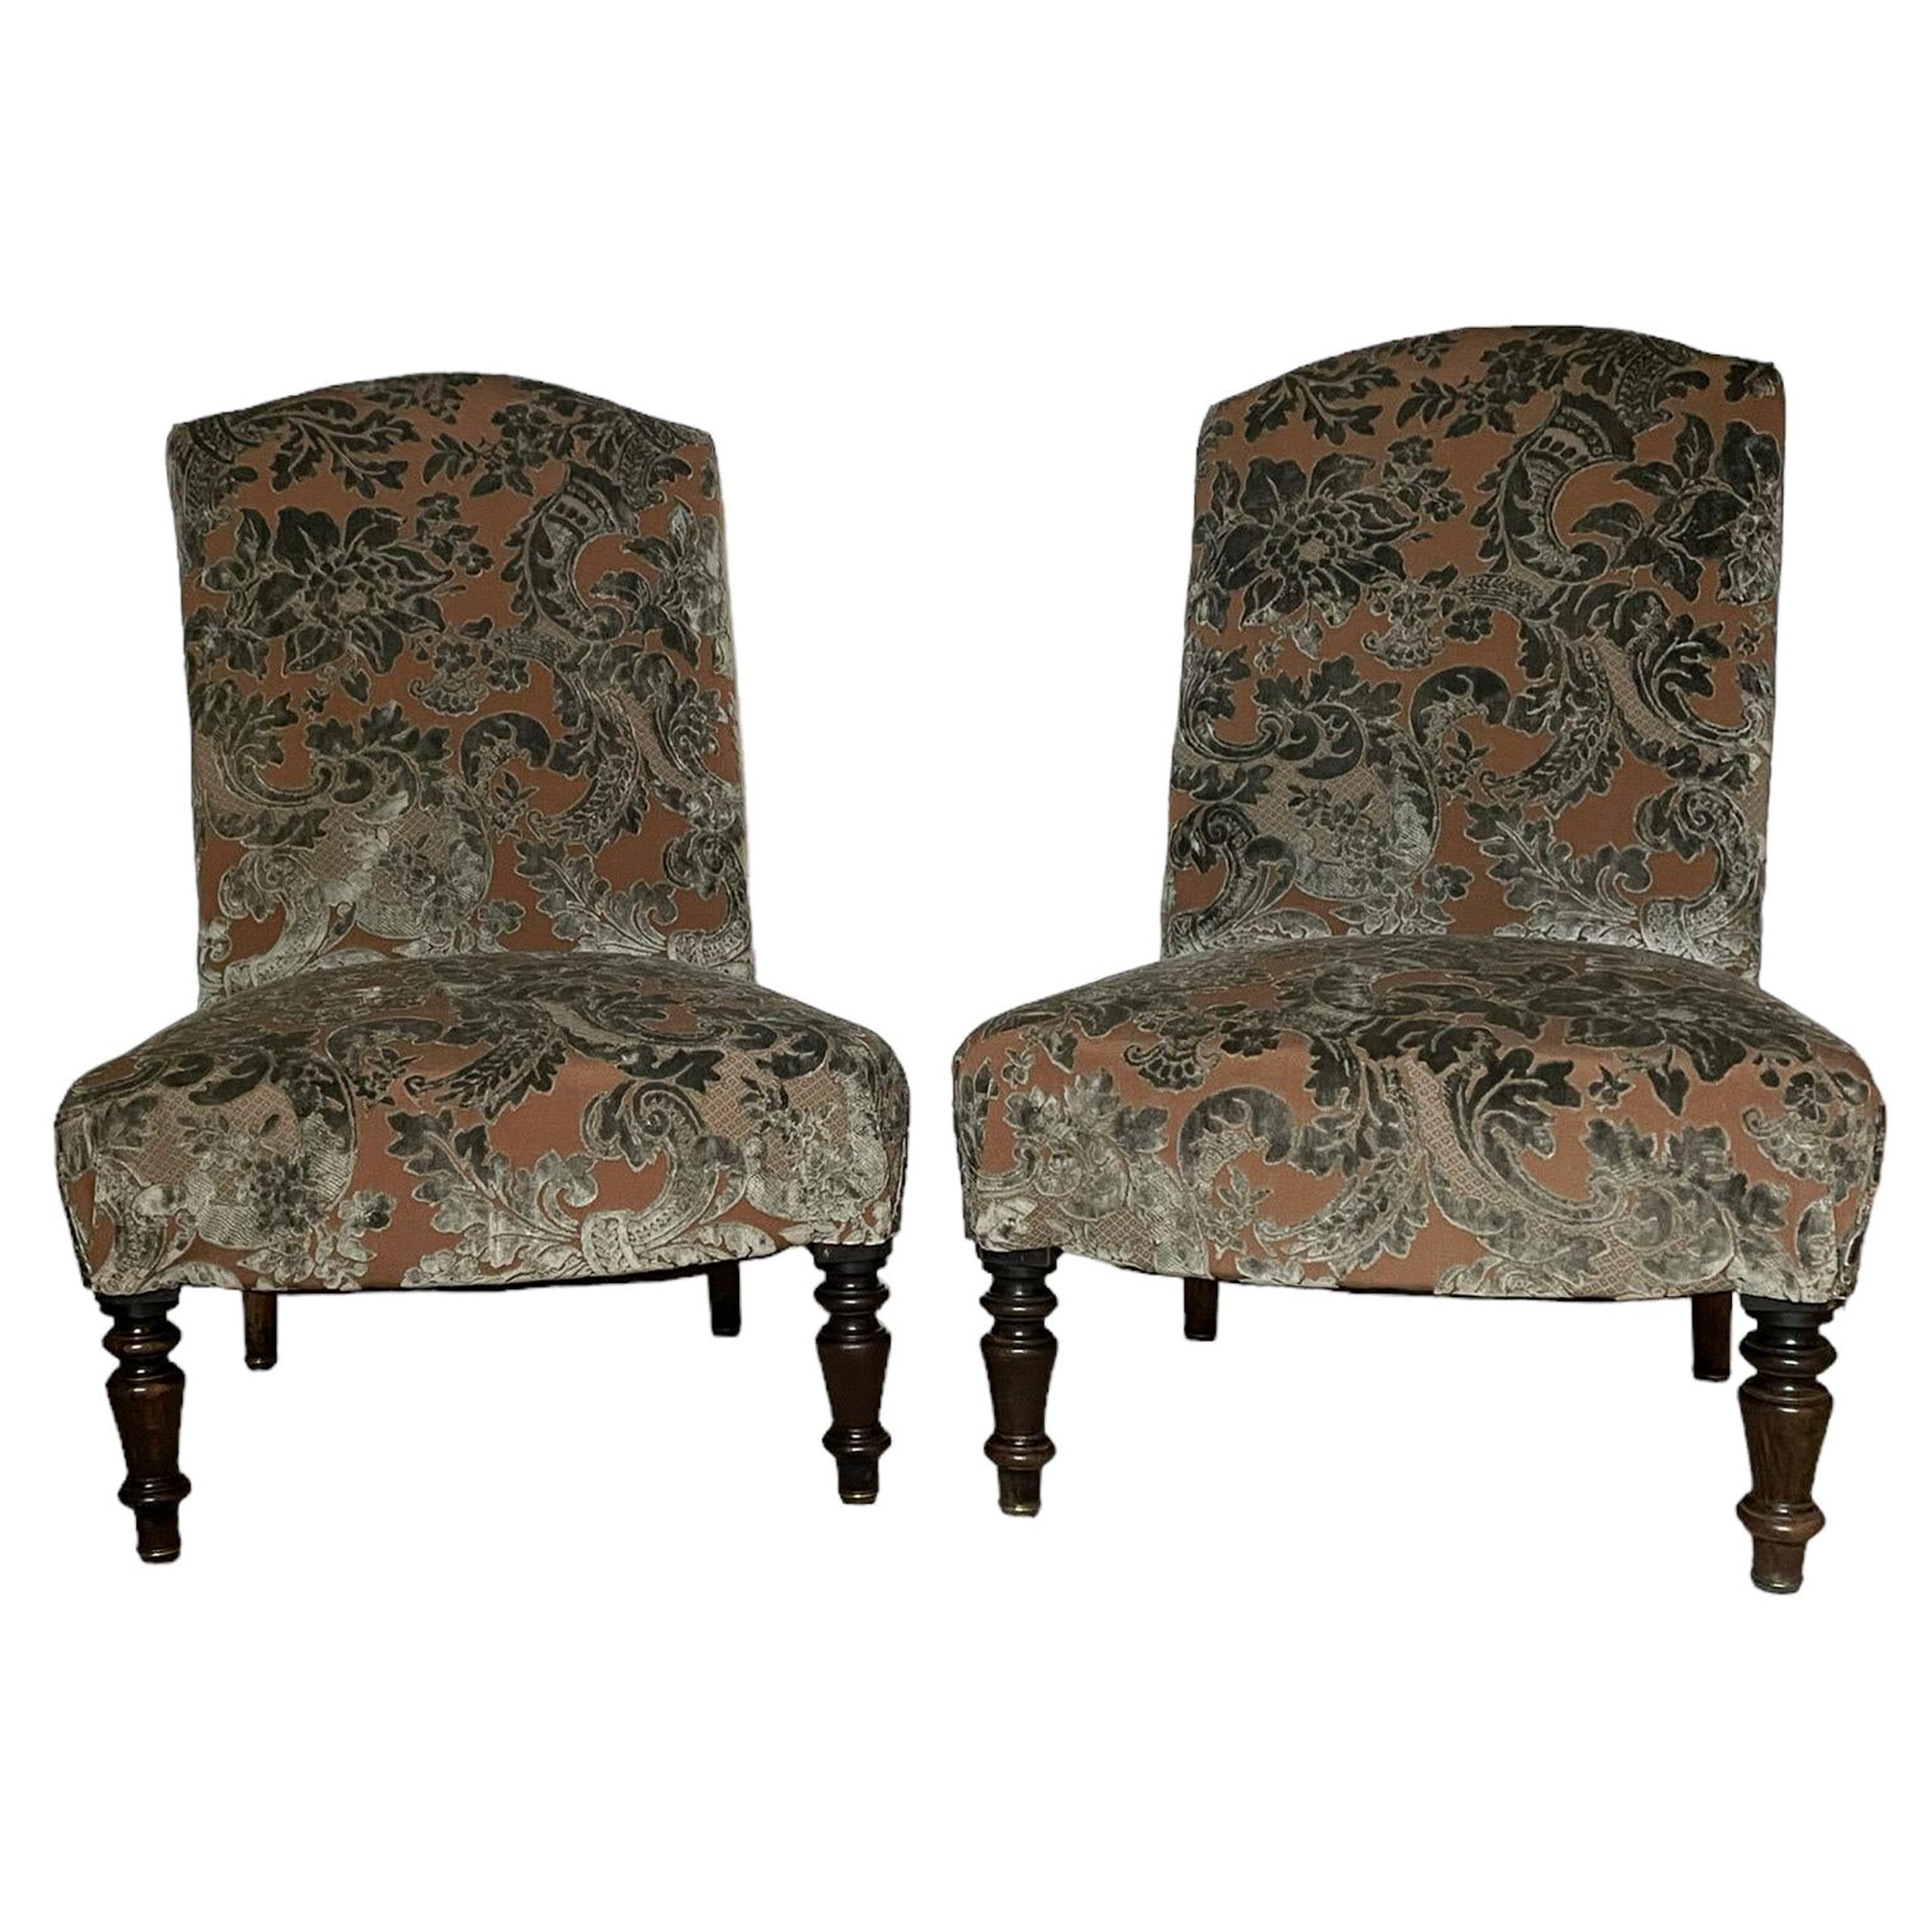 French pair of Napoleon III slipper chairs

A fabulous pair of low back upholstered side chairs, nicely wide seated design with beautifully polished ebonized legs.
Fully reupholstered in this relief fabric
seat depth 18 inches.

Sprung seats so very